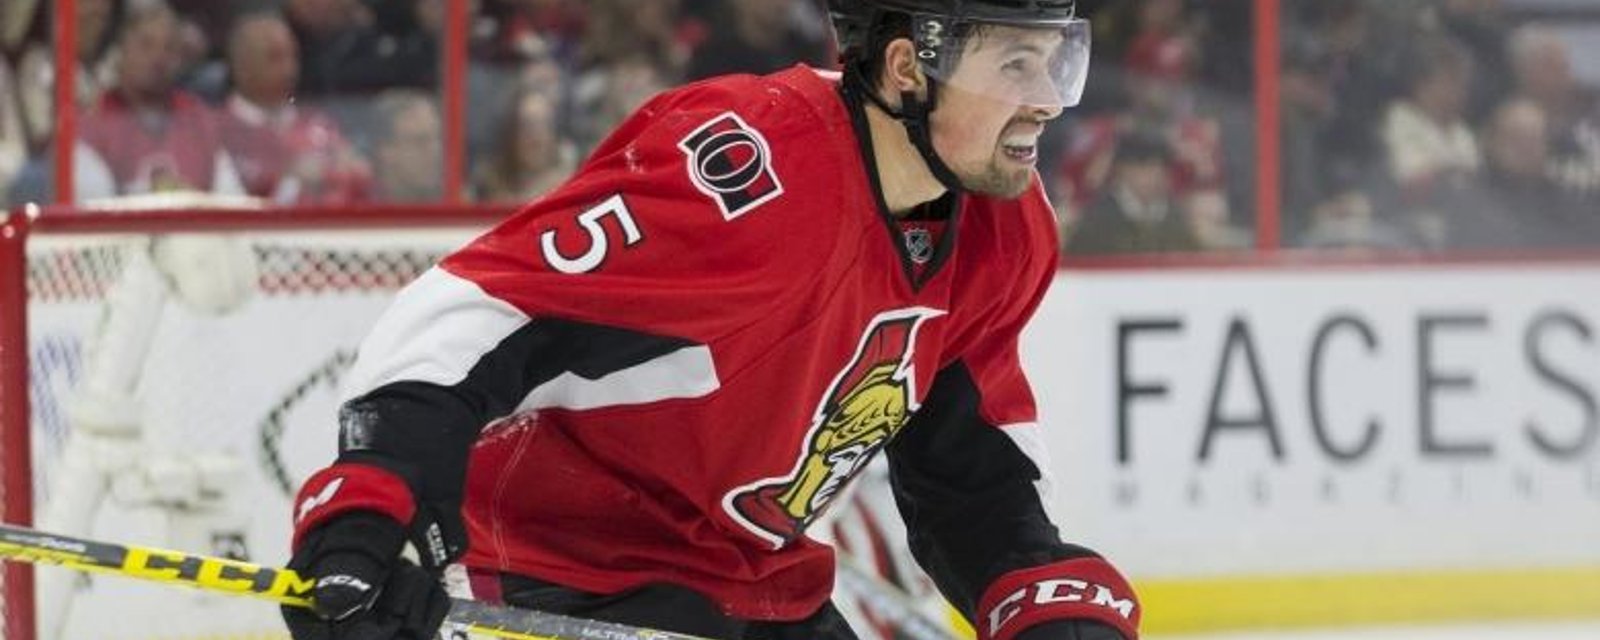 Report: Senators sign Ceci, but fail to work out long-term deal.